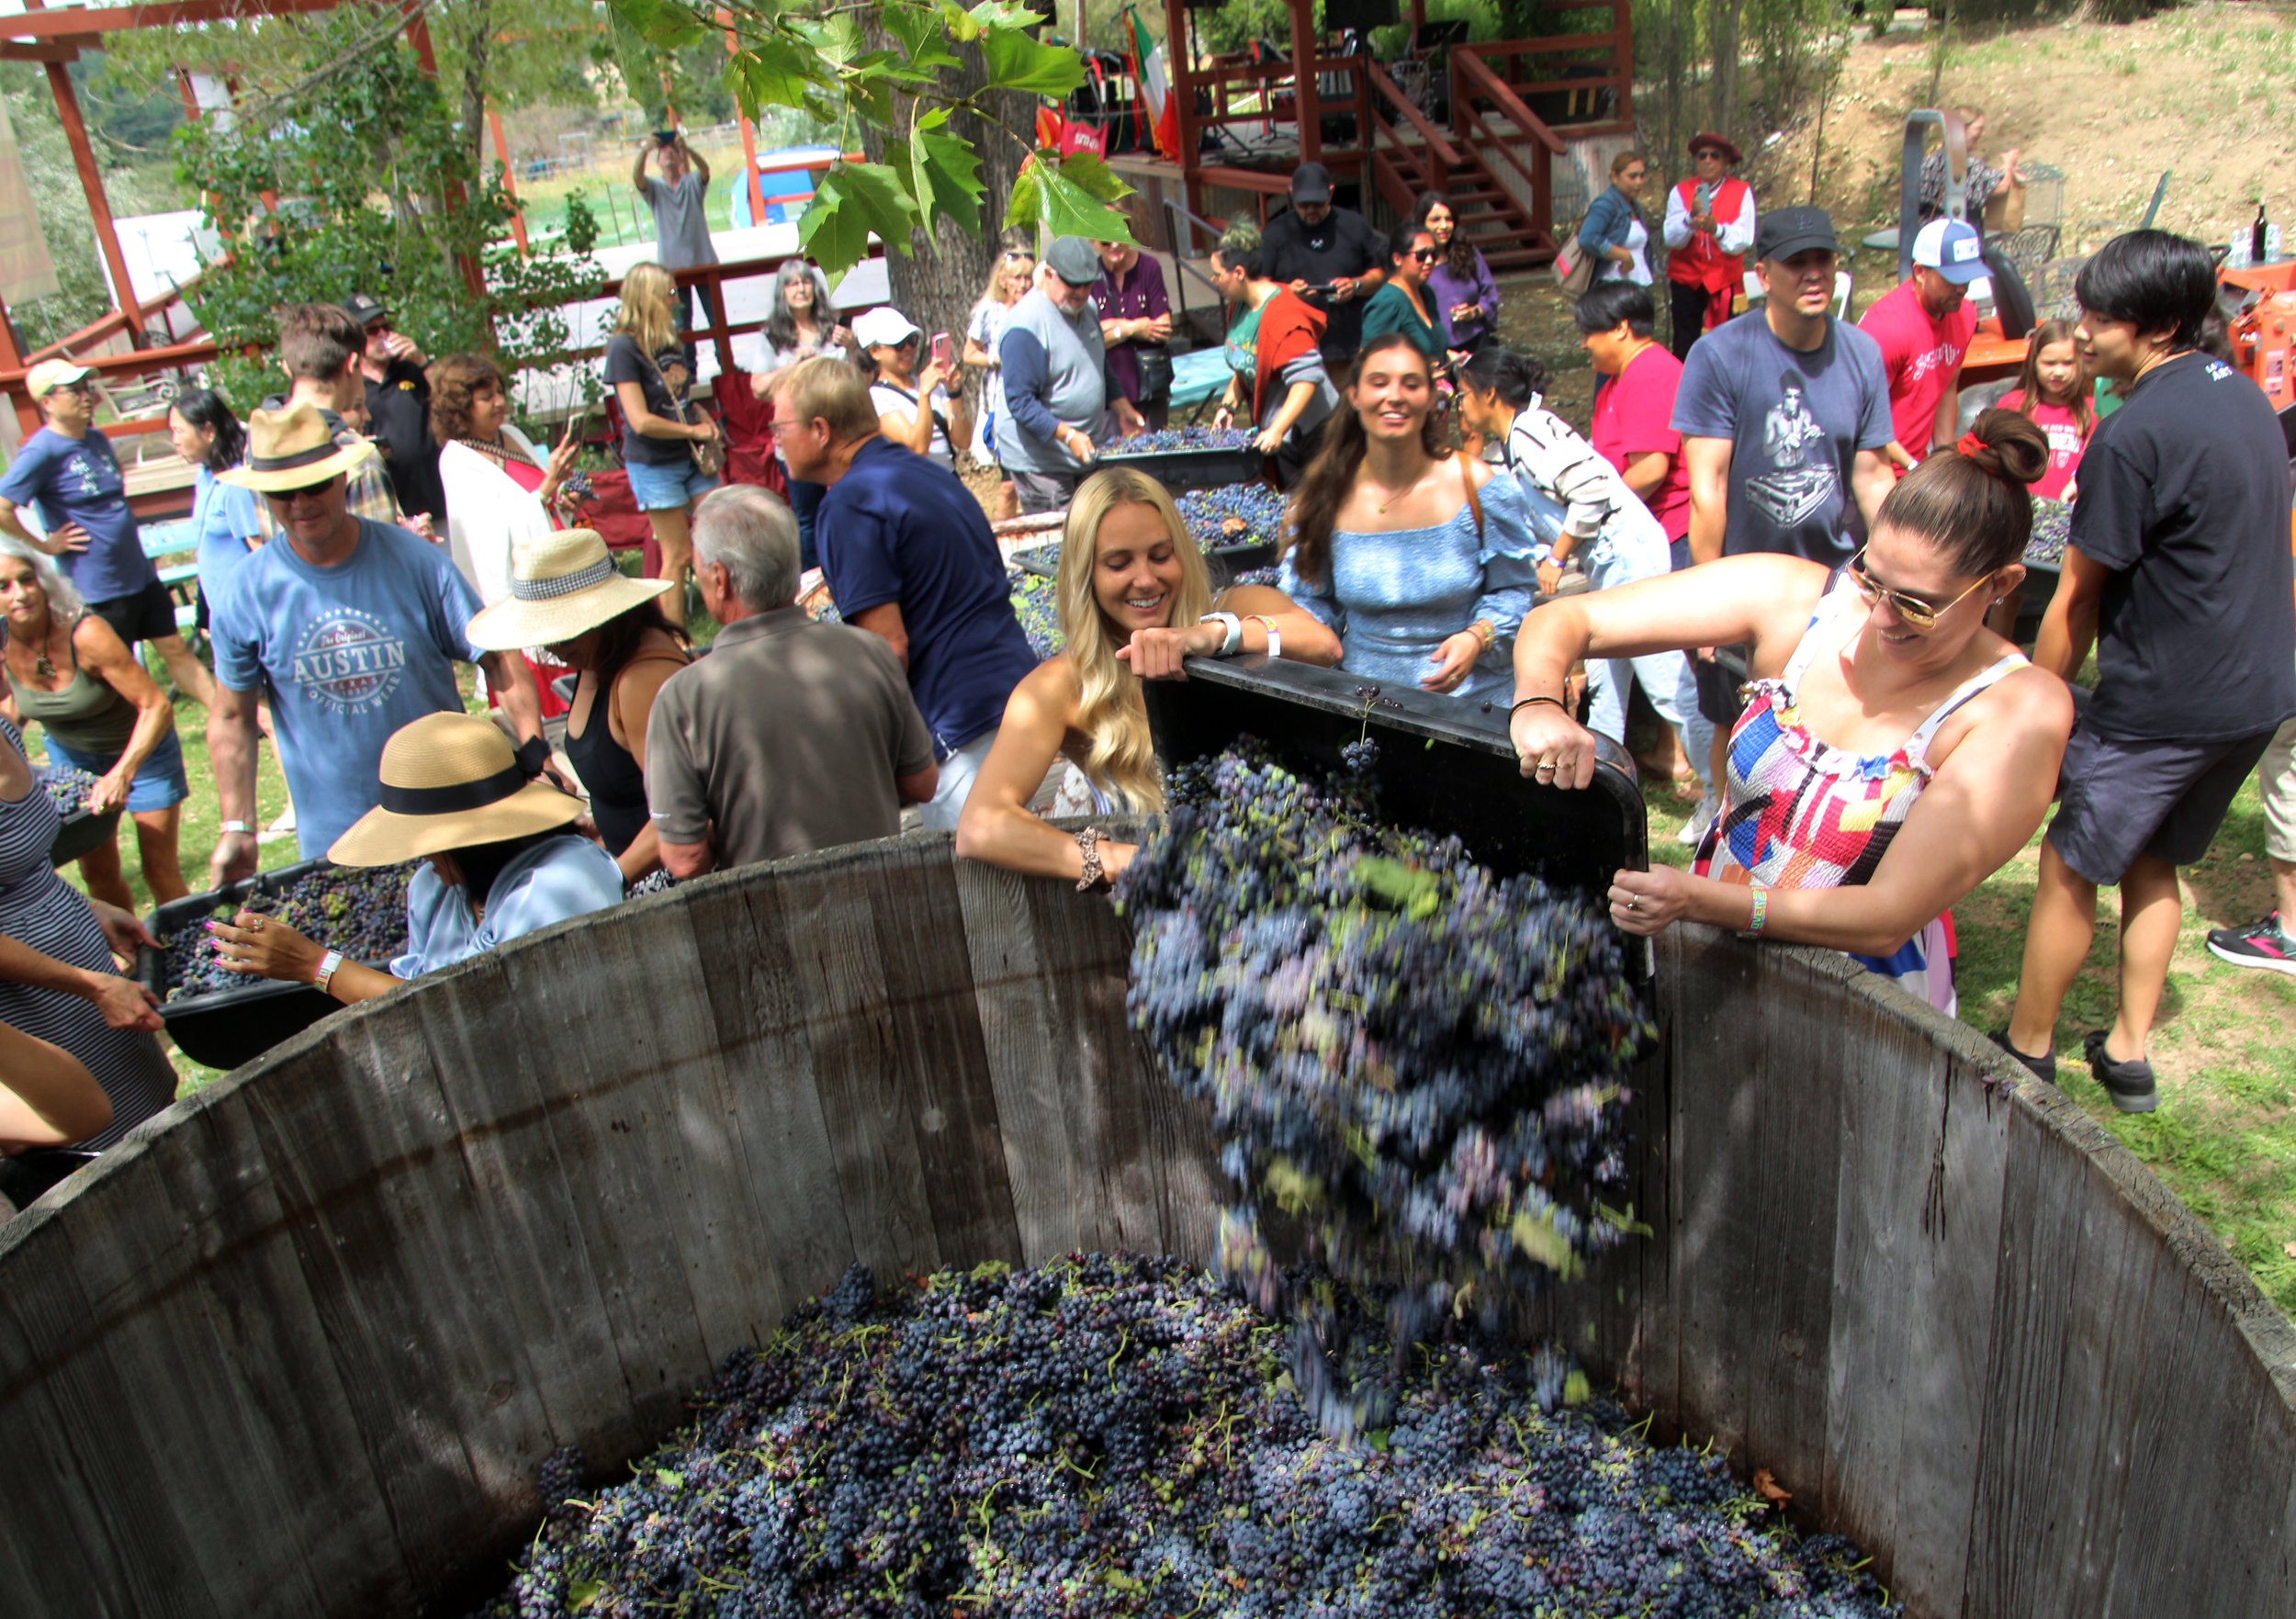 Girls pouring grapes, Menghini winery 2023.jpg